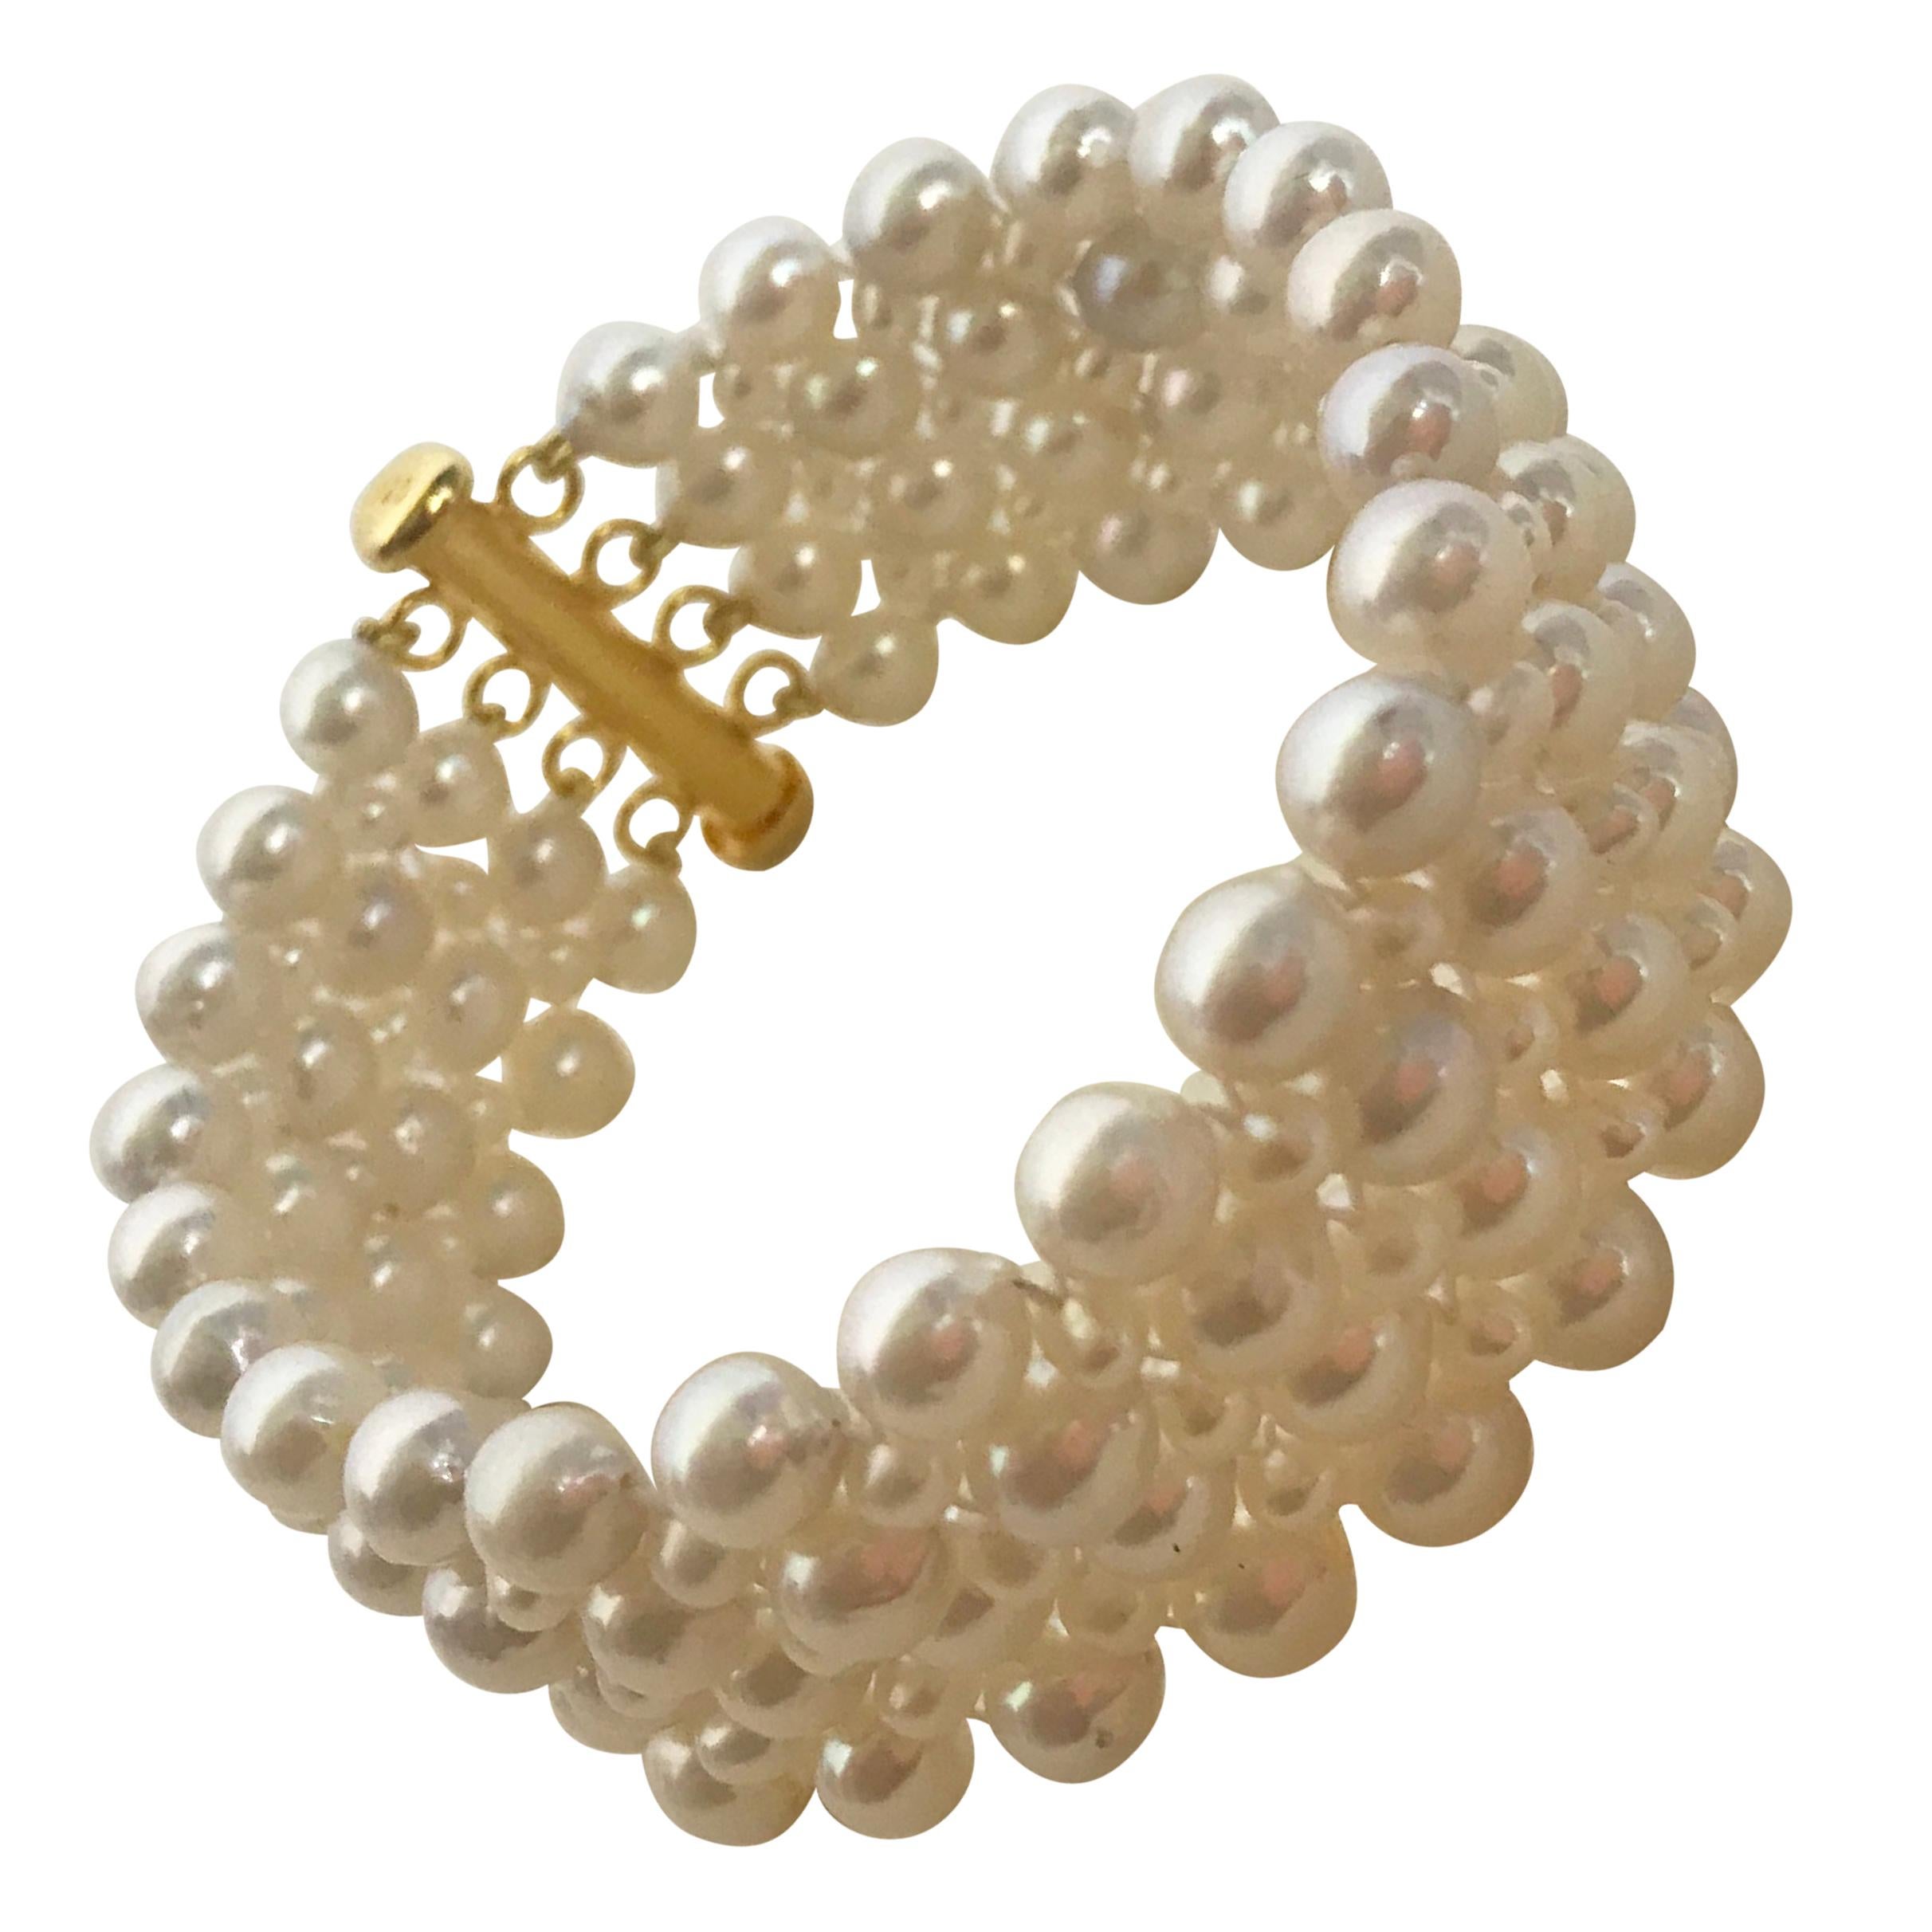 Marina J. Woven Pearl Bracelet with 14 Karat Yellow Gold Plated Clasp